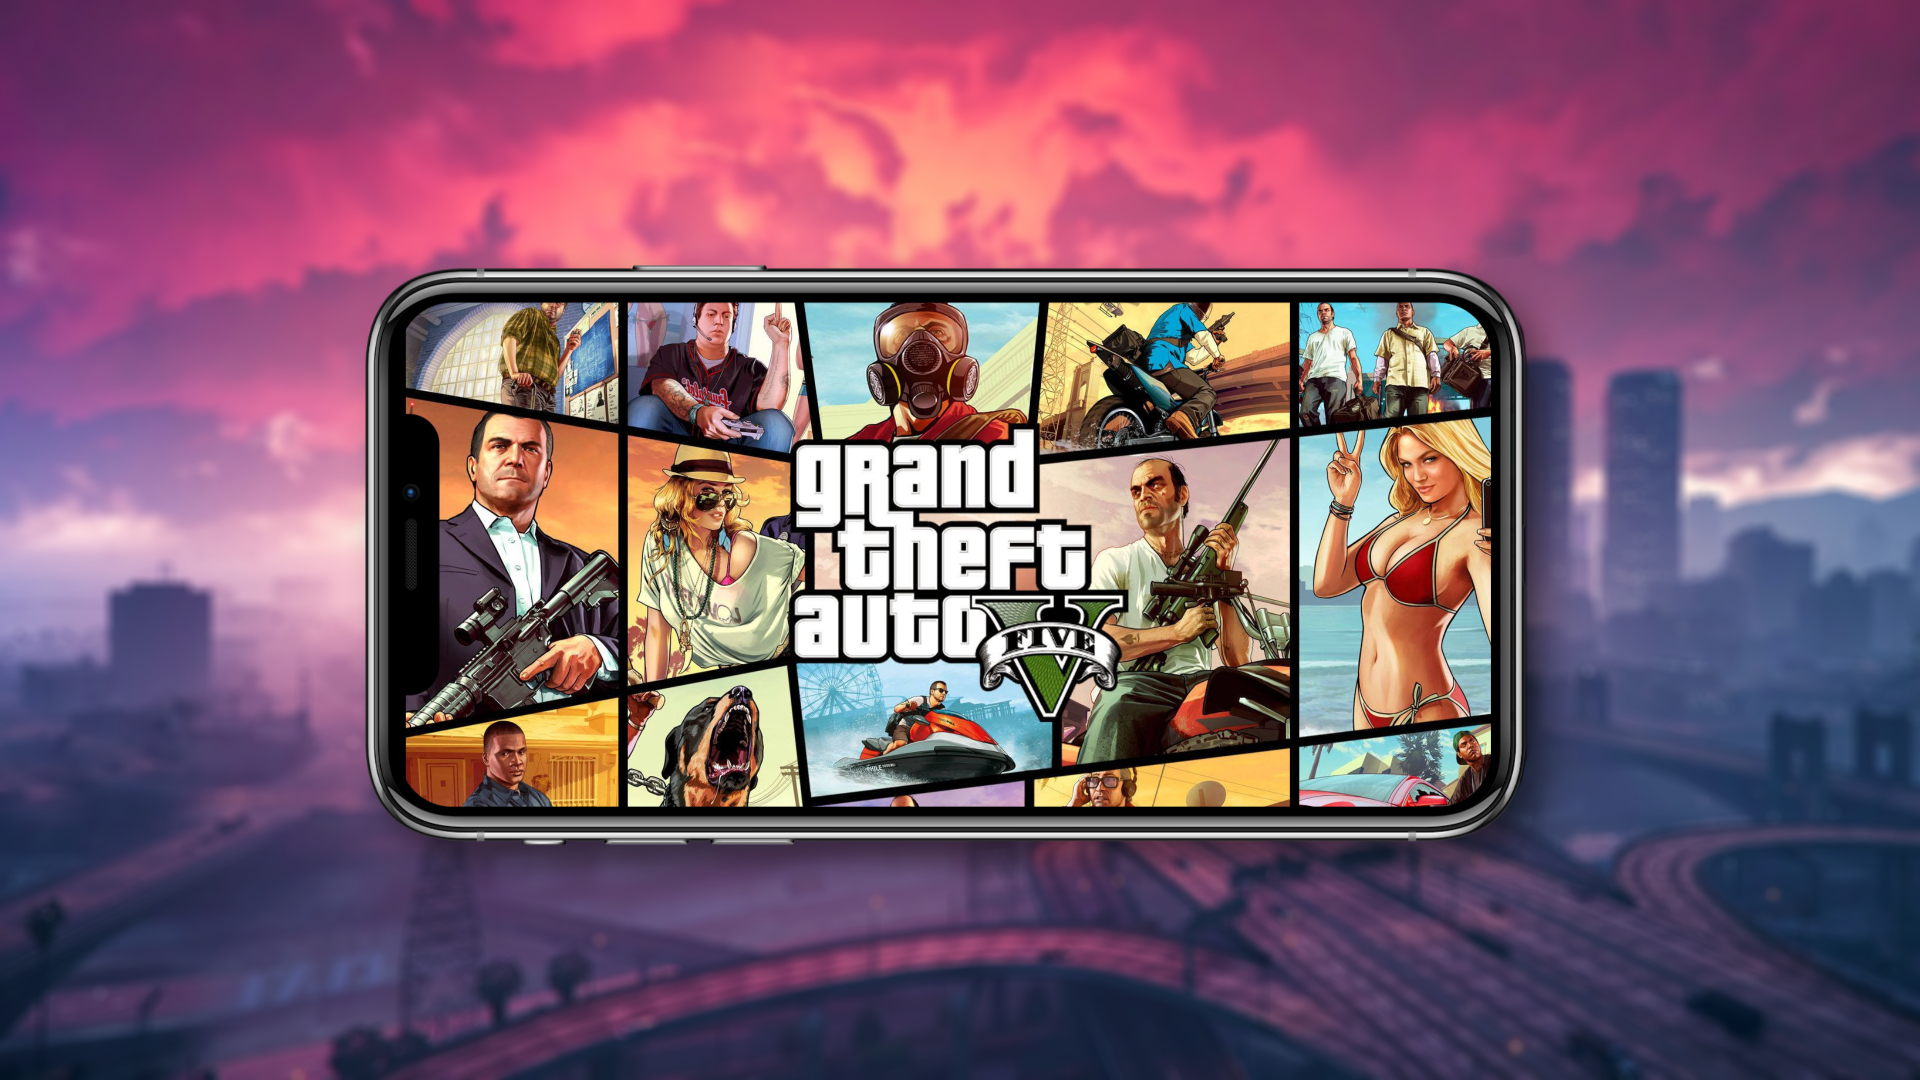 Grand Theft Auto 3 Steam Deck - You NEED TO KNOW This Before You